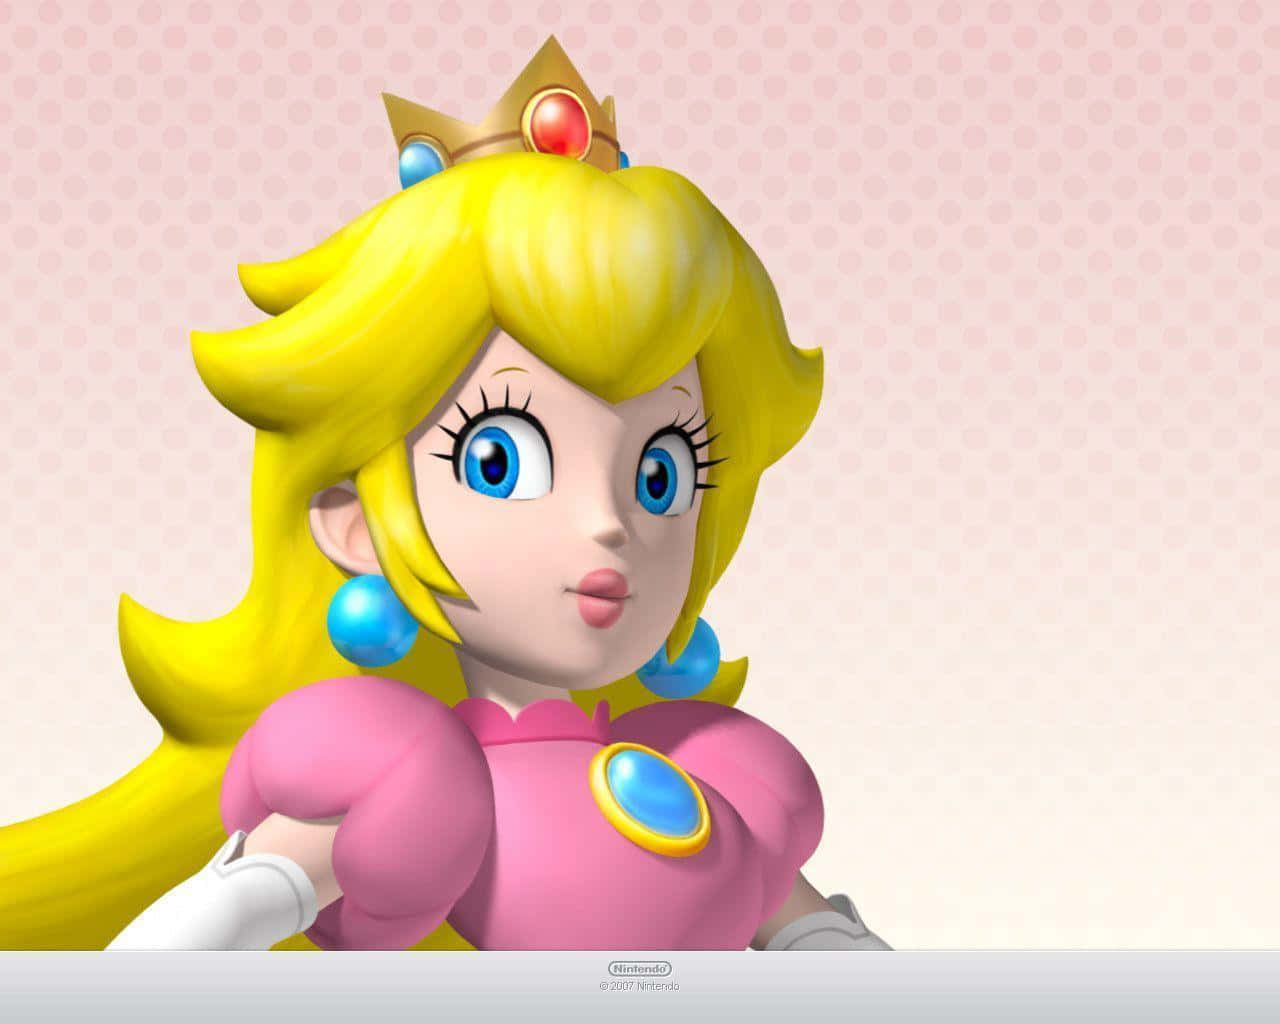 Princess Peach shows her charming personality Wallpaper